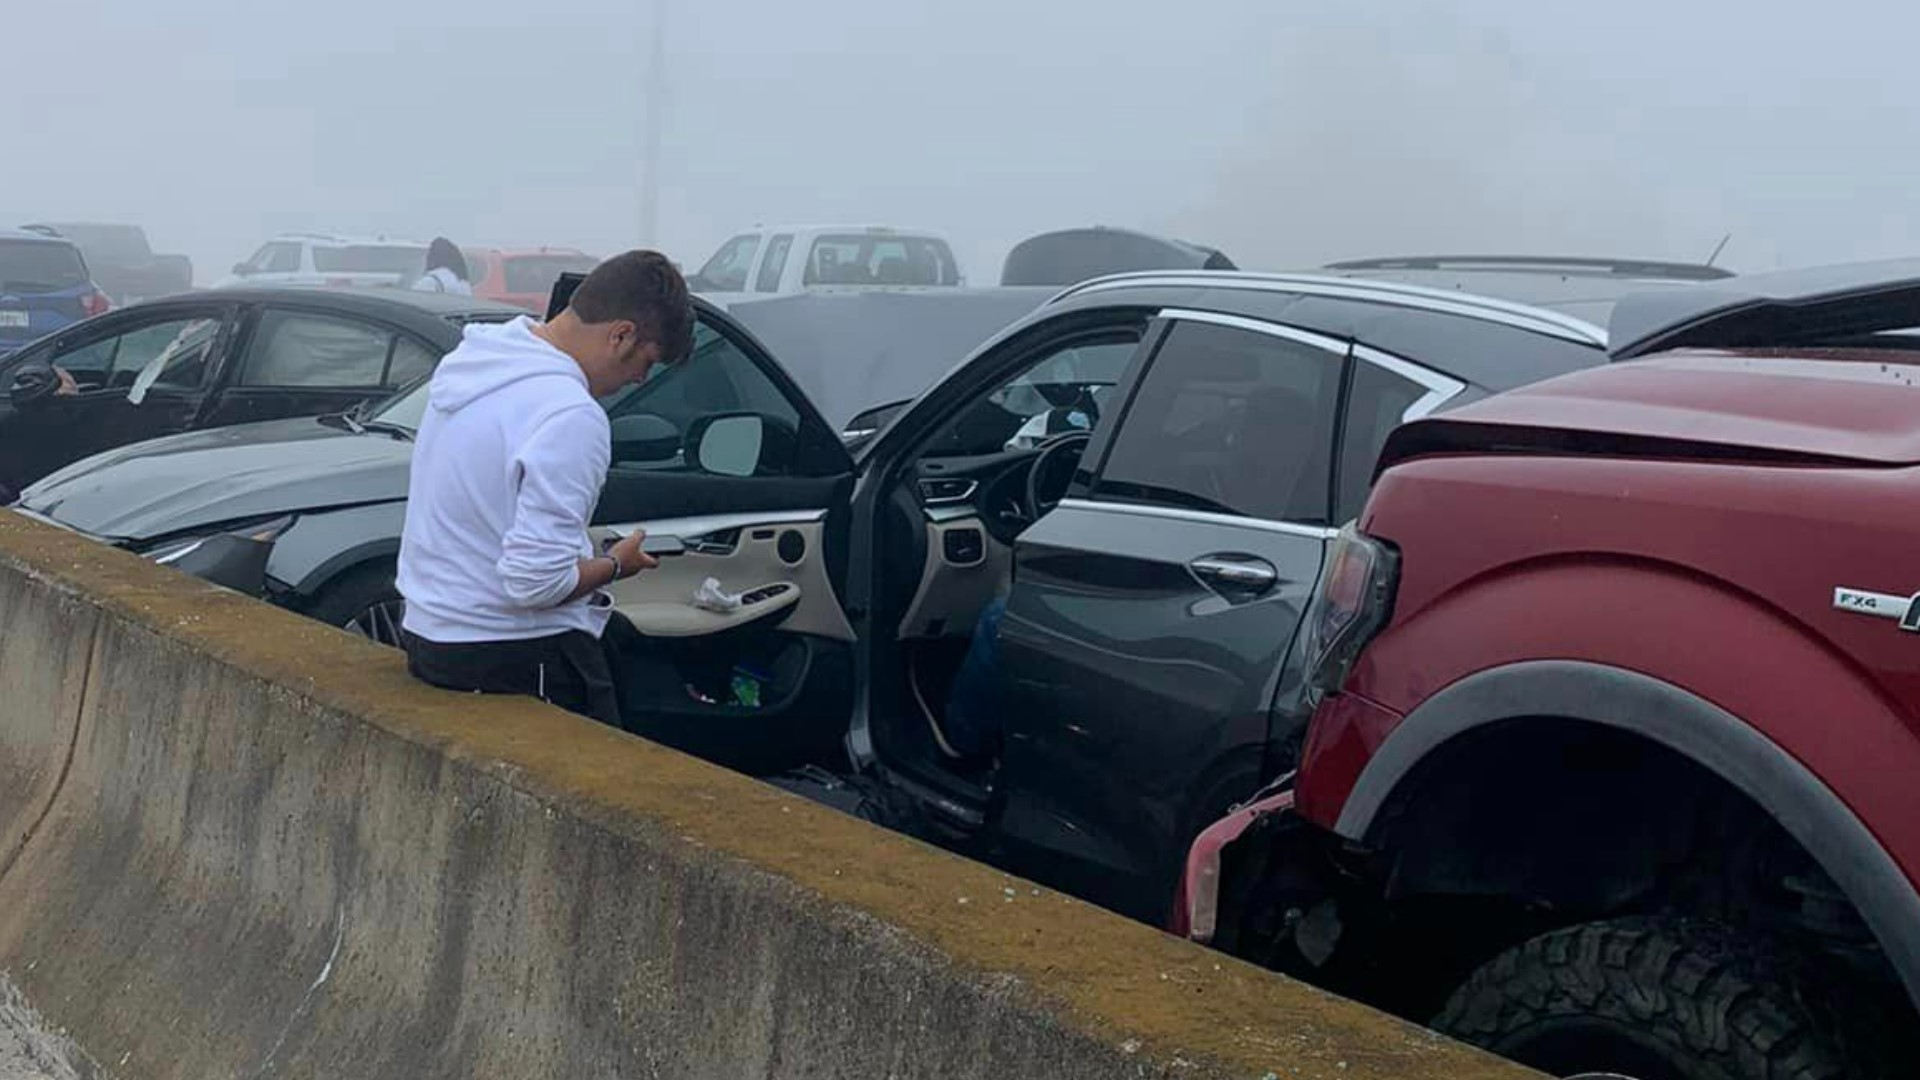 Police say they started receiving calls about crashes on I-55 around 9 a.m.